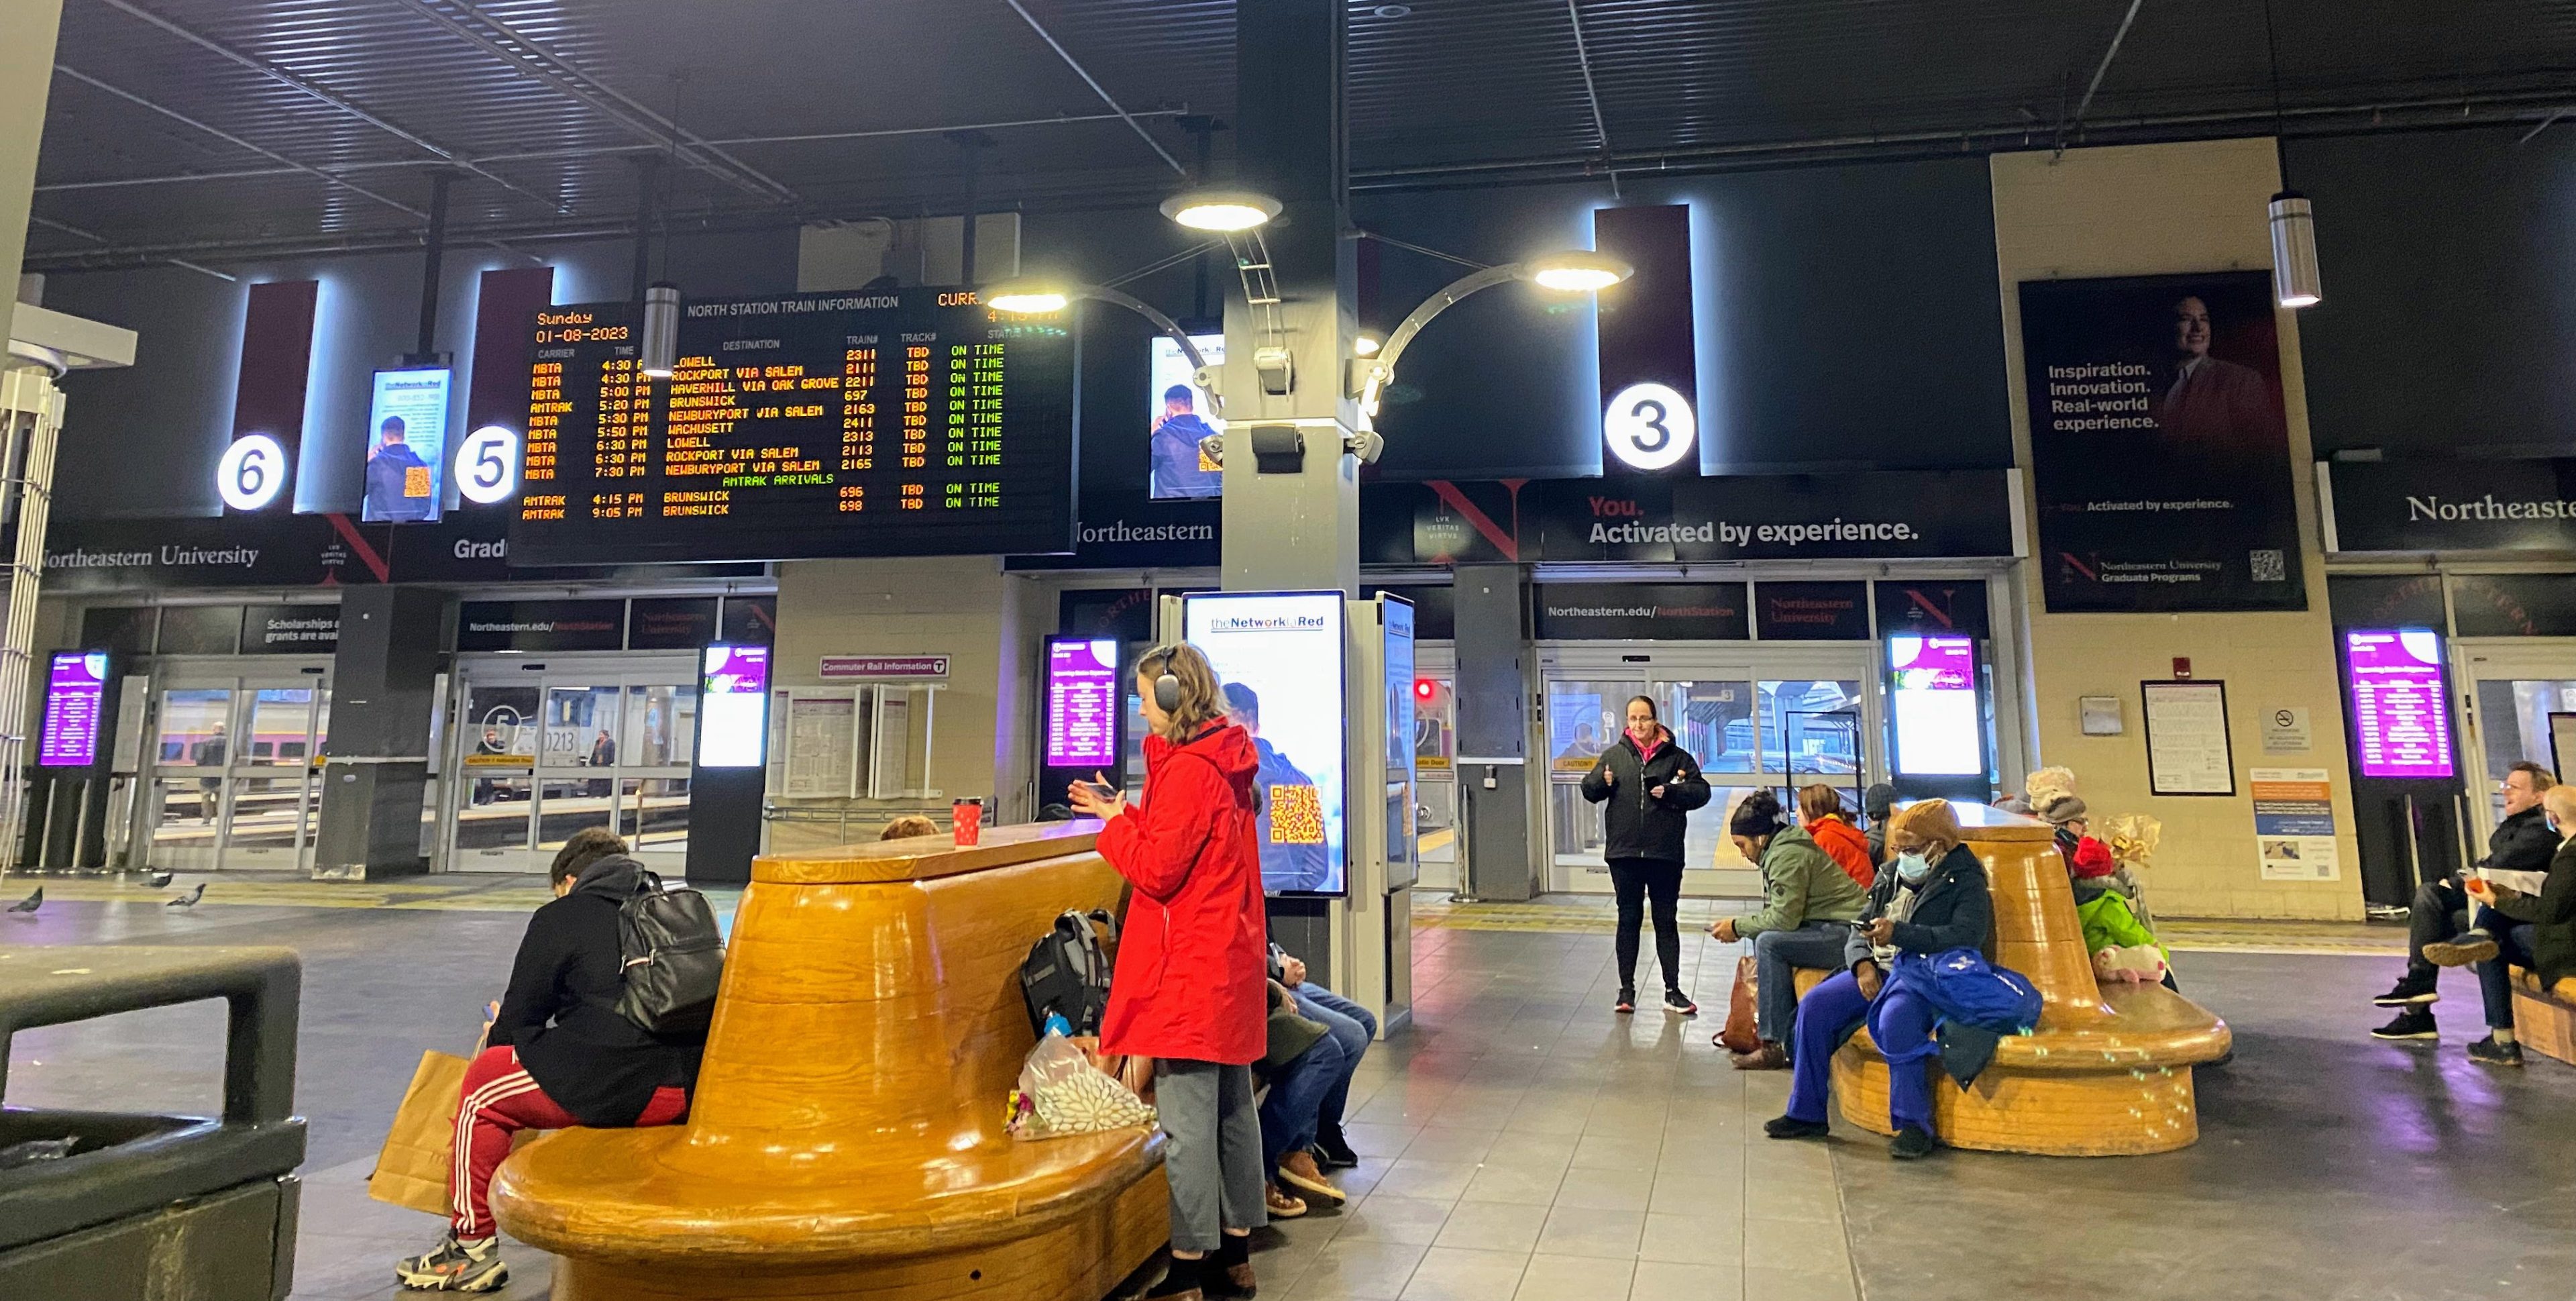 folks stand or sit on large wooden benches while waiting for their train inside North Station. The timetable hangs high in the background.